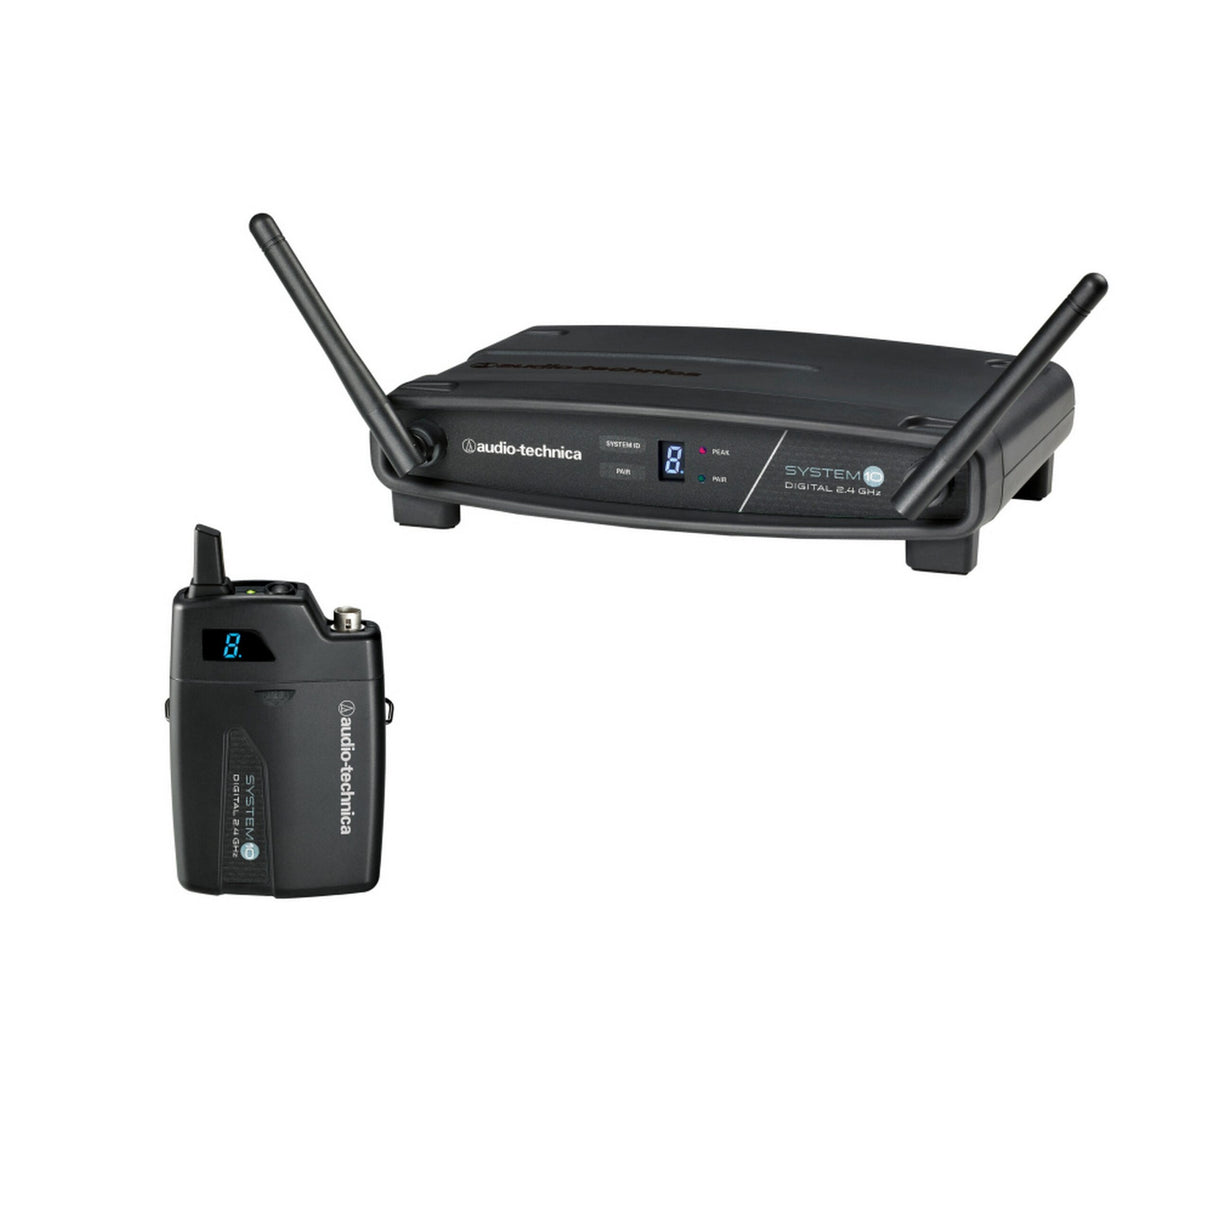 Audio-Technica ATW-1101 Stack-Mount Digital Wireless System with Receiver and Bodypack Transmitter